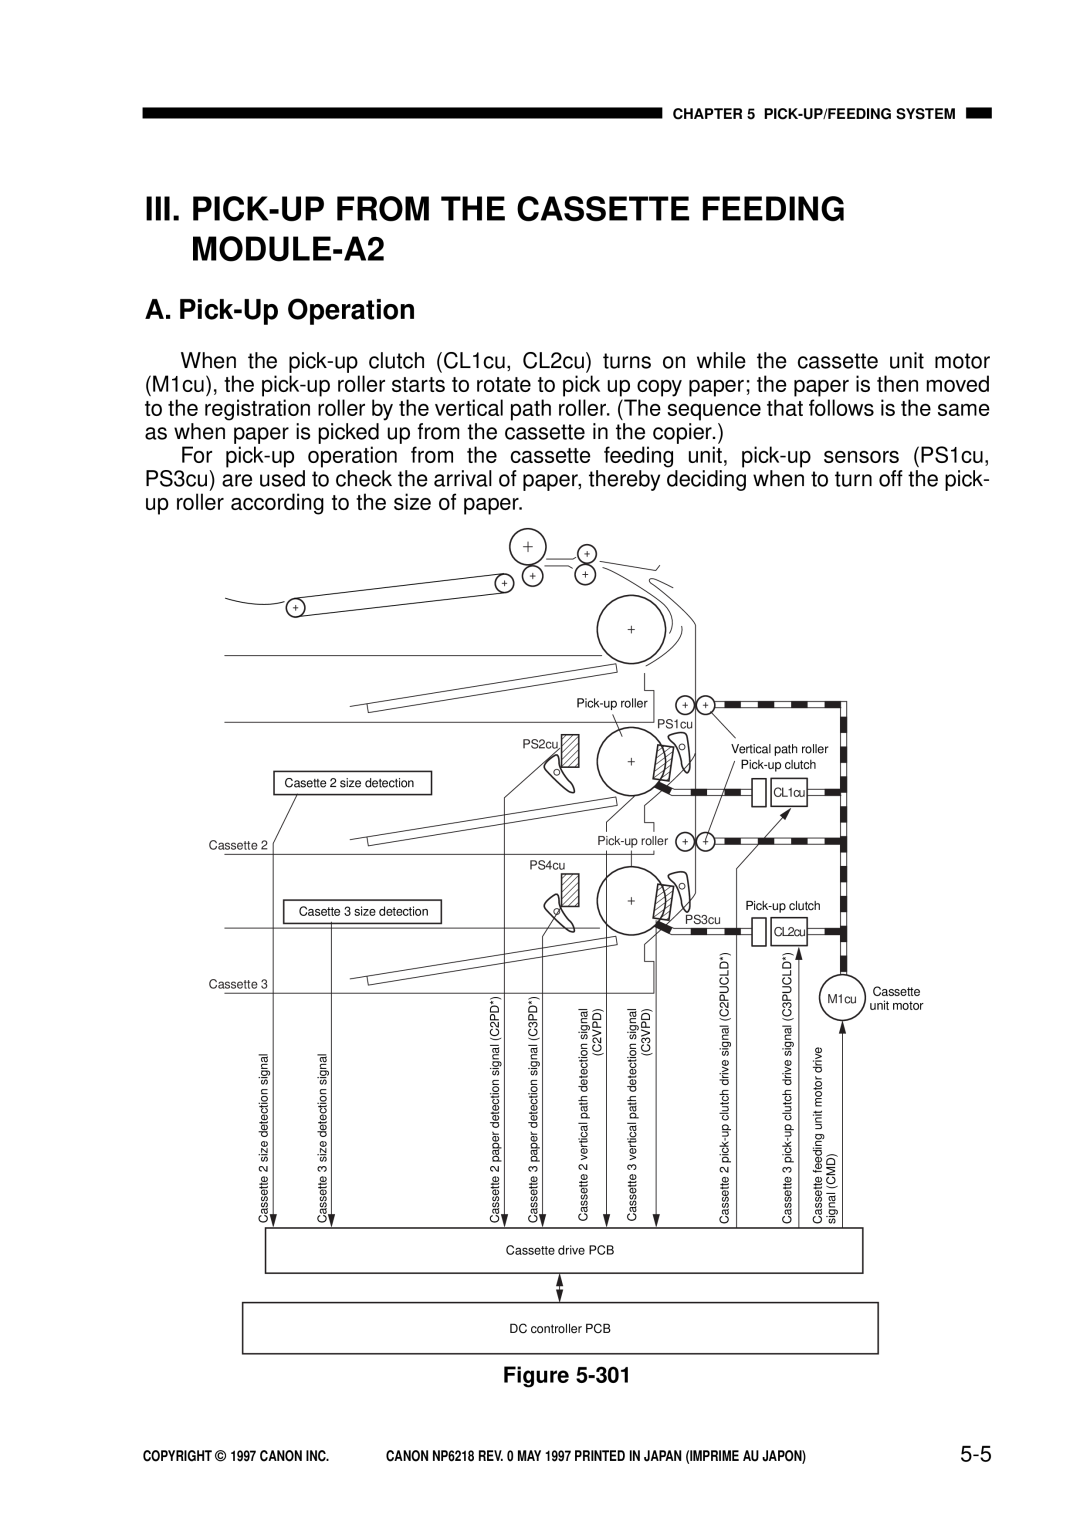 Canon NP6218, FY8-13EX-000 service manual III. PICK-UP FROM THE CASSETTE FEEDING MODULE-A2, A. Pick-Up Operation 